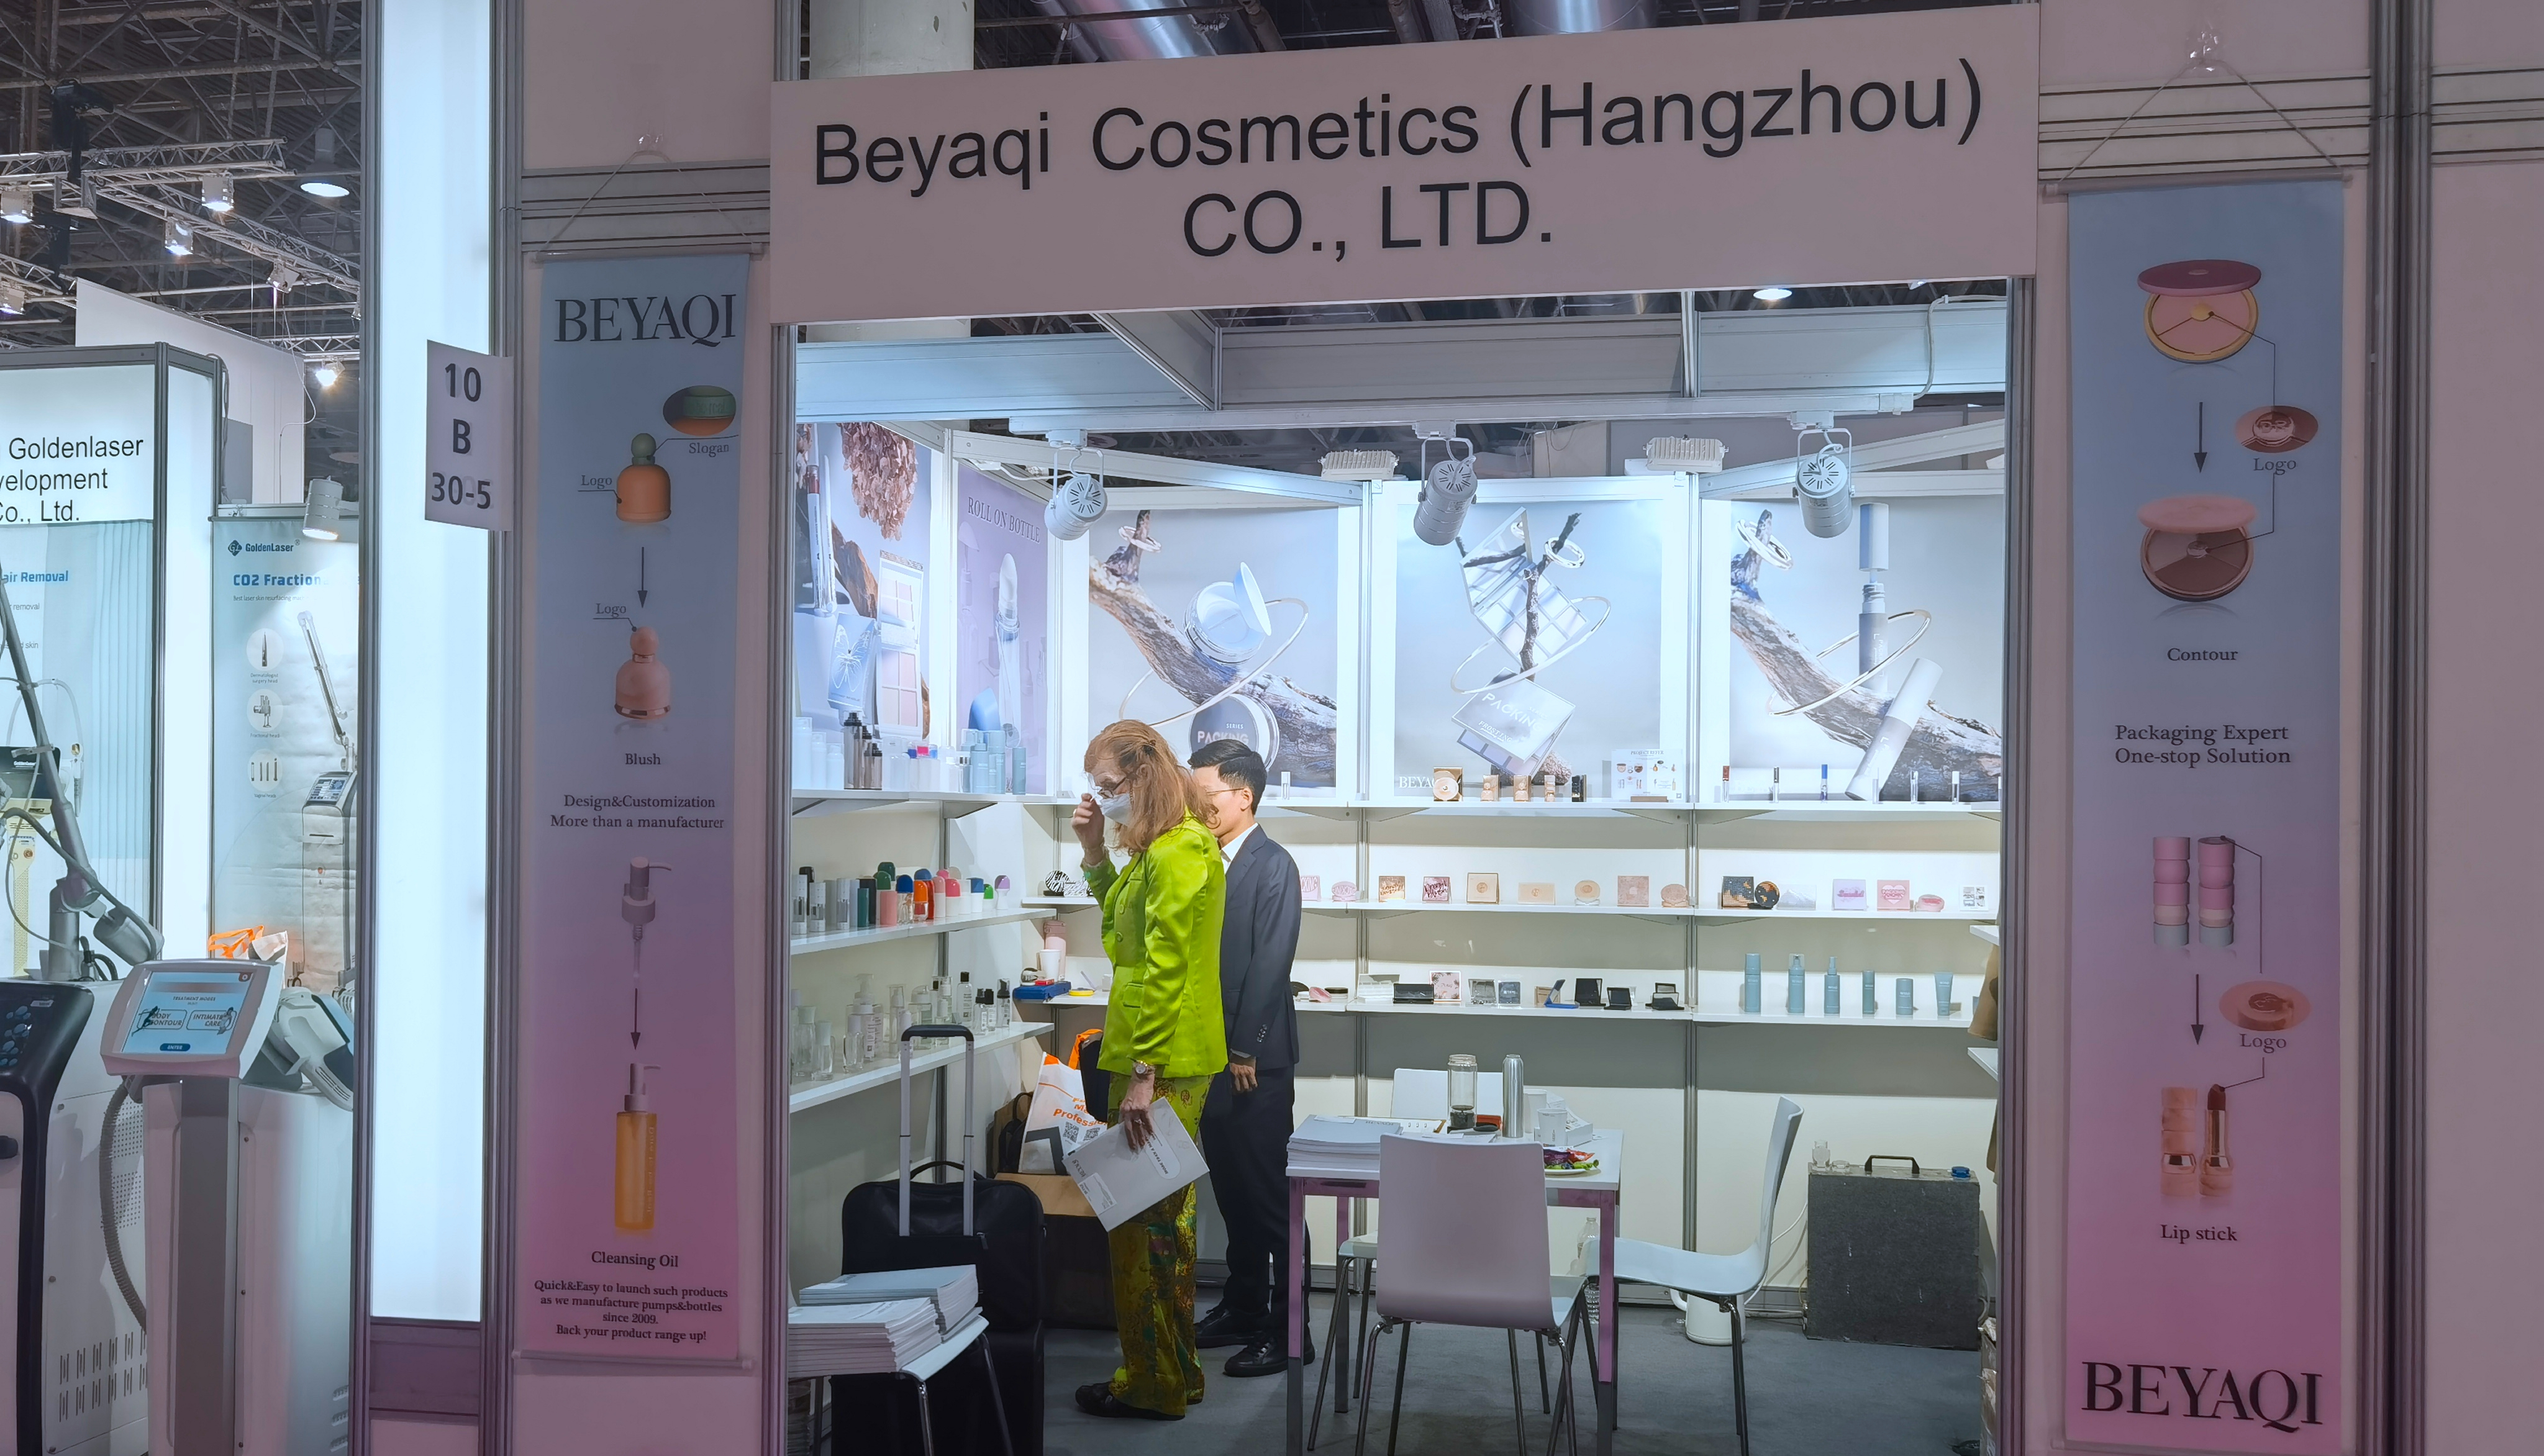 Thank You for Joining BEYAQI at BEAUTY DÜSSELDORF 2023 - A Recap of Our Successful Exhibition